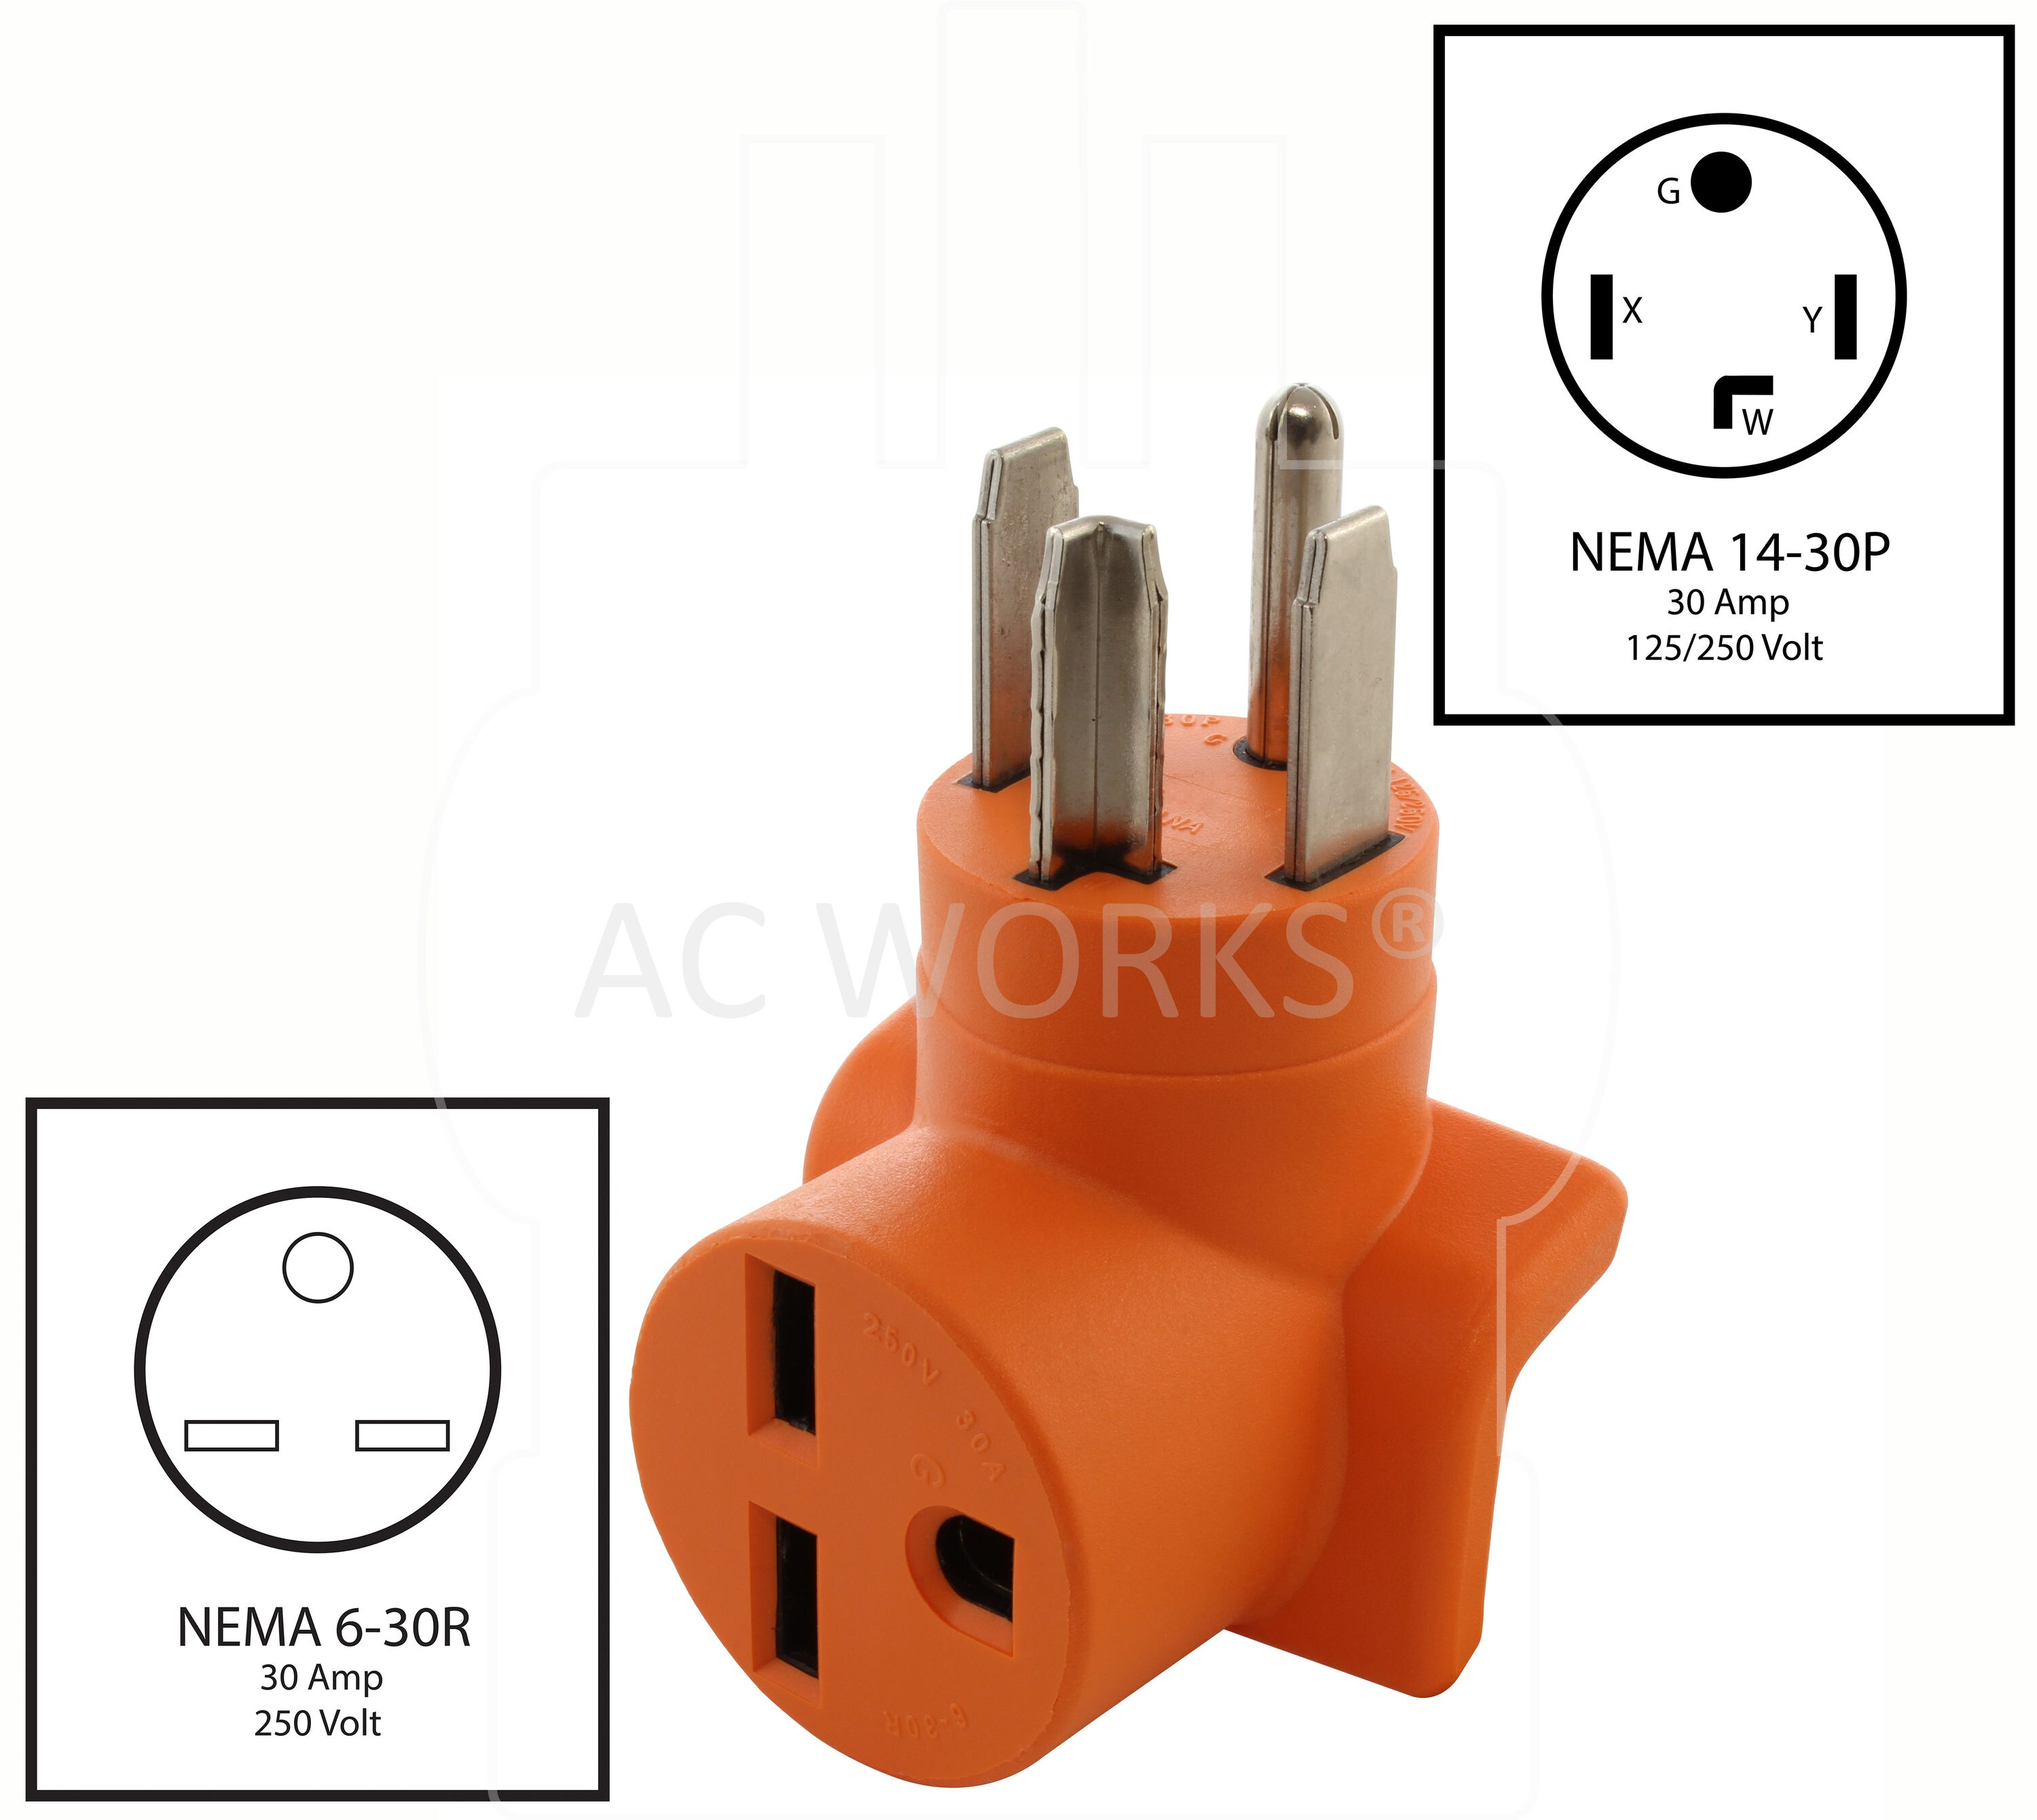 4-Prong Electric Range Outlet Adapter NEMA 14-50P to NEMA 6-30R by AC WORKS® 